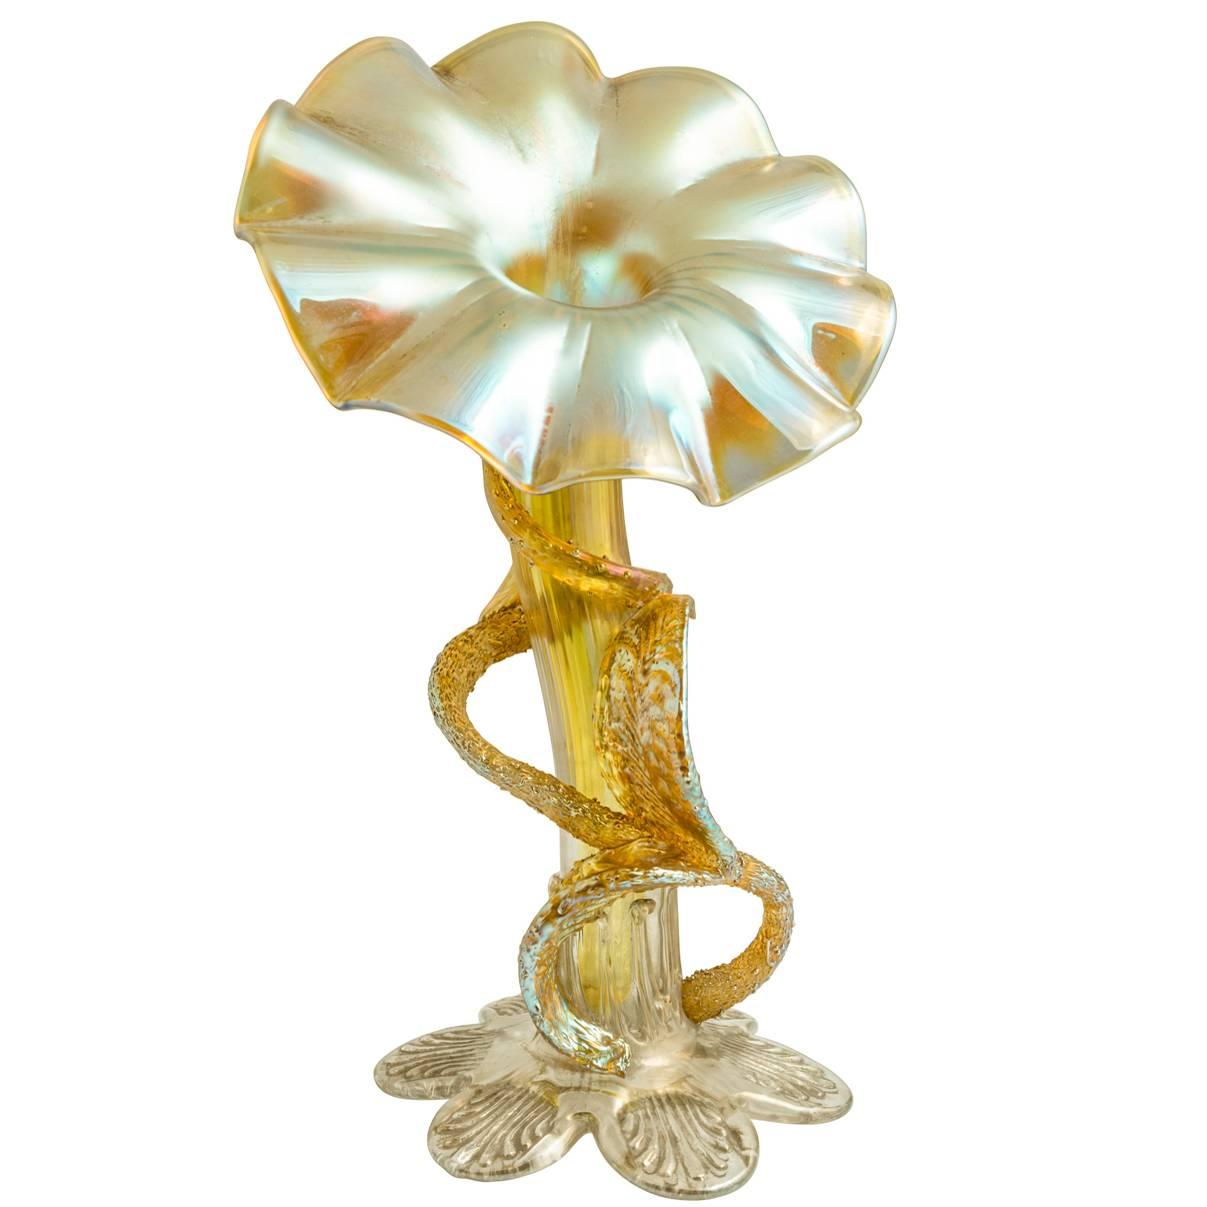 Loetz “Jack-in-the-pulpit” Vase, circa 1910 with Paper Pattern from the Archives